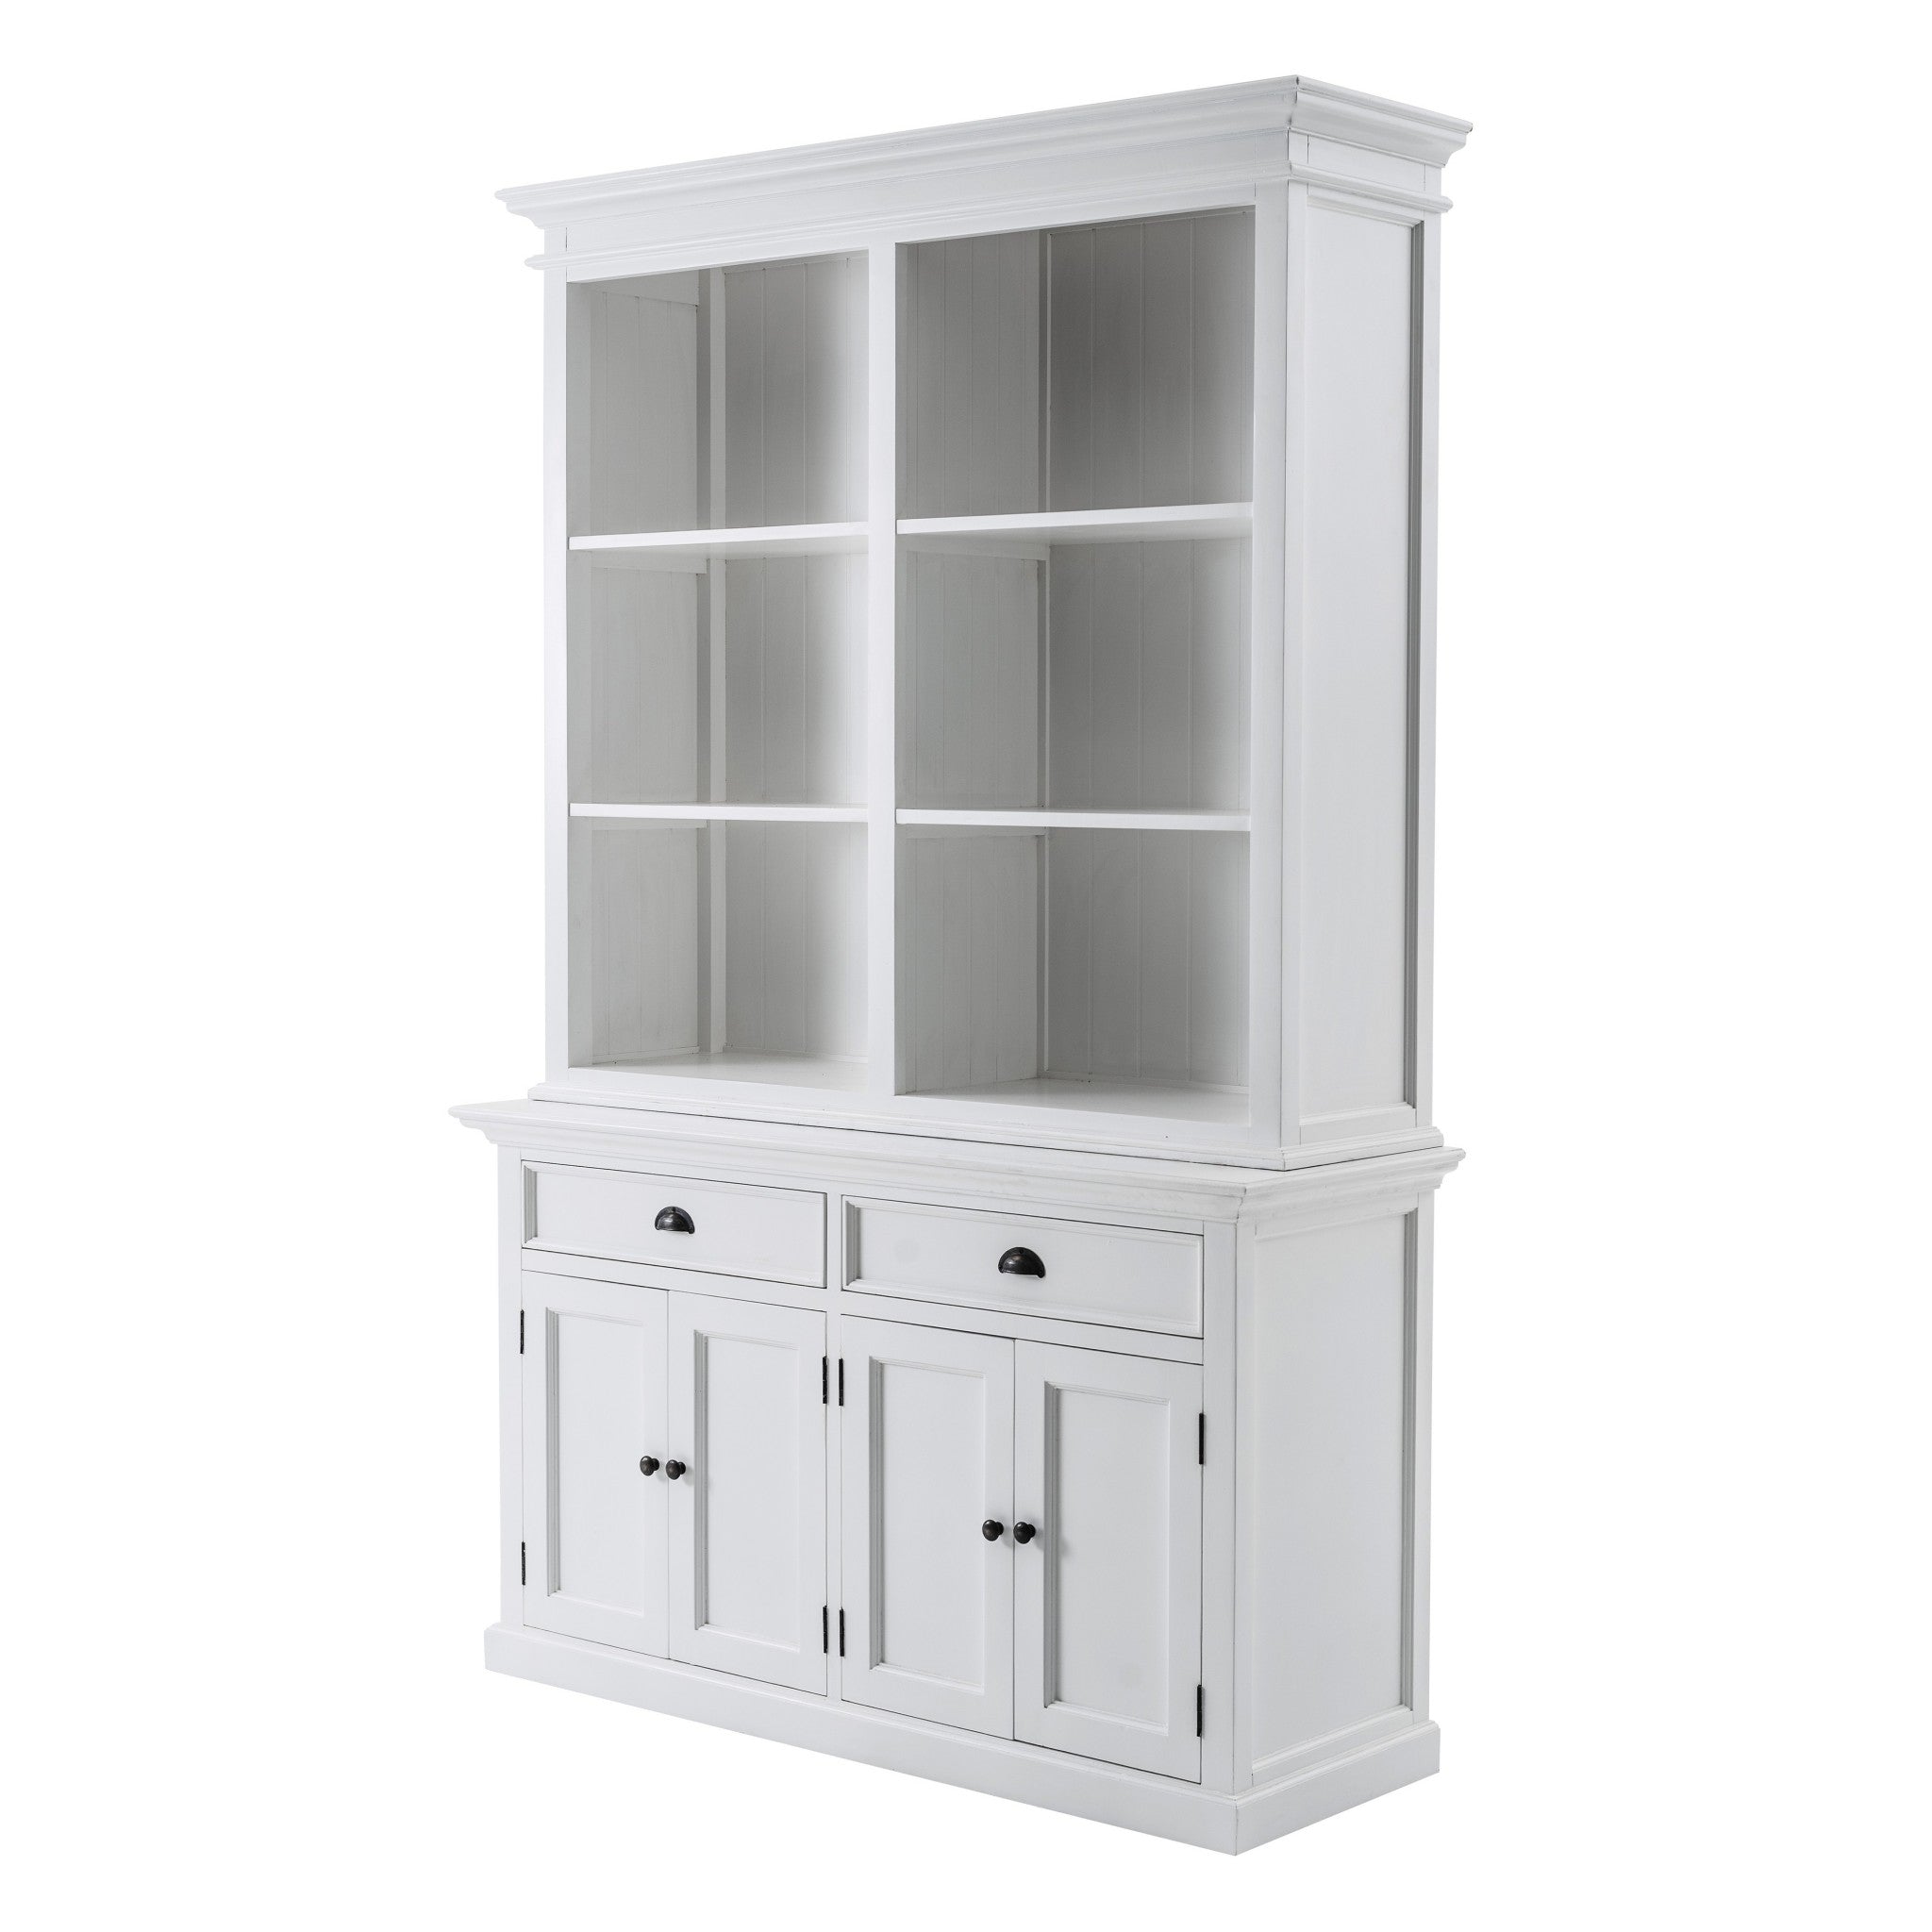 87" White Solid Wood Adjustable Four Tier Bookcase